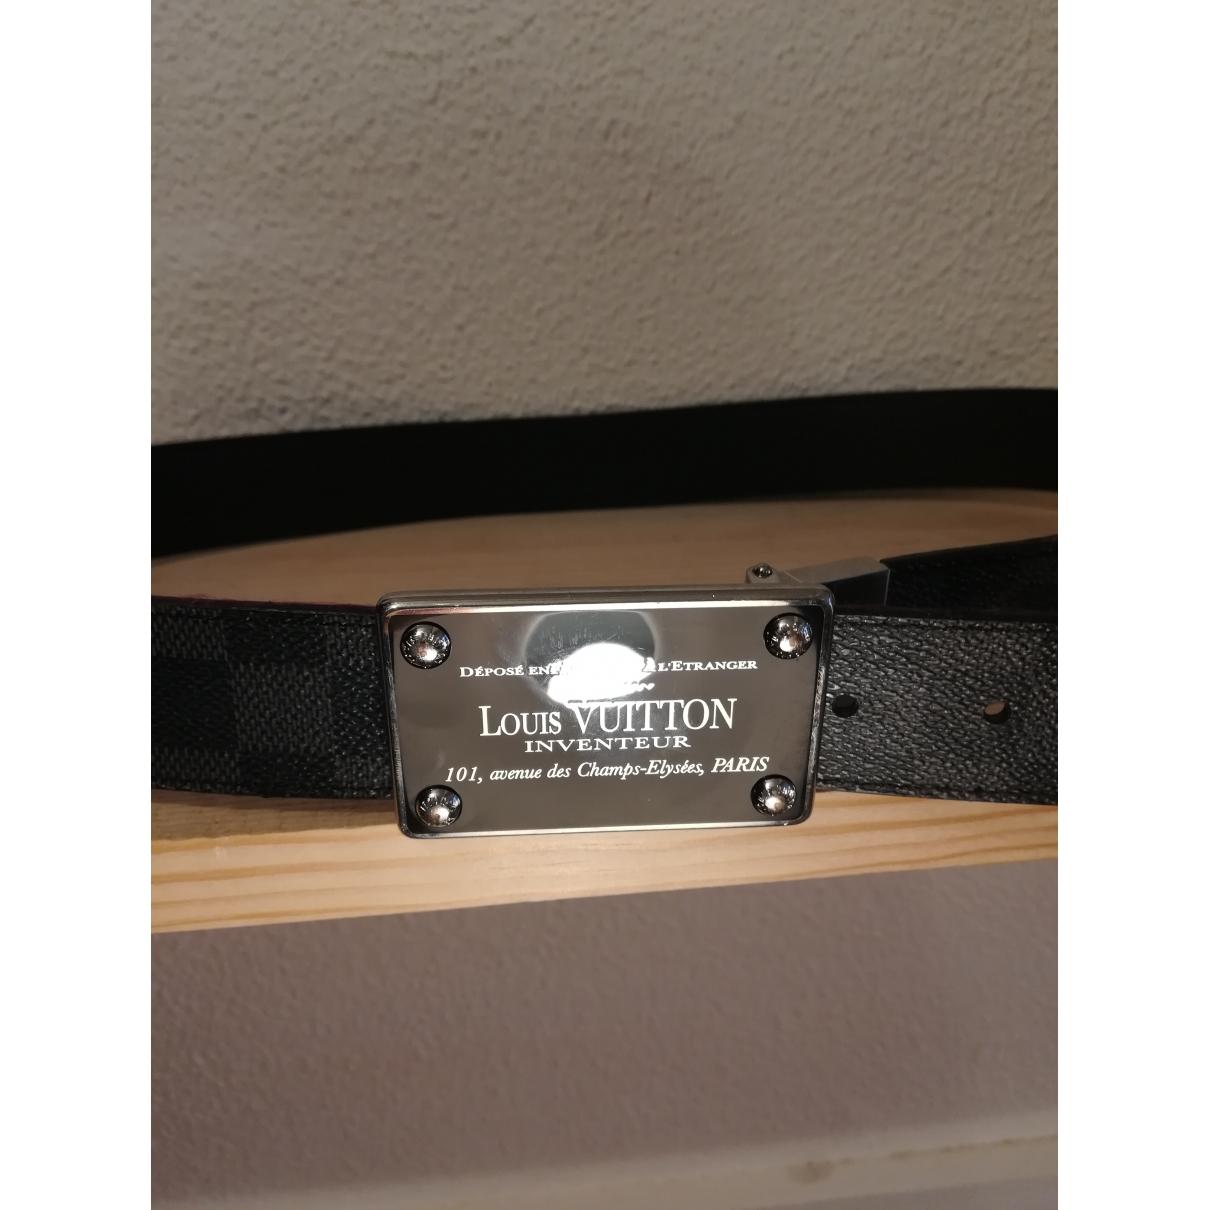 Louis Vuitton Anthracite Cloth Belts in Black for Men - Lyst